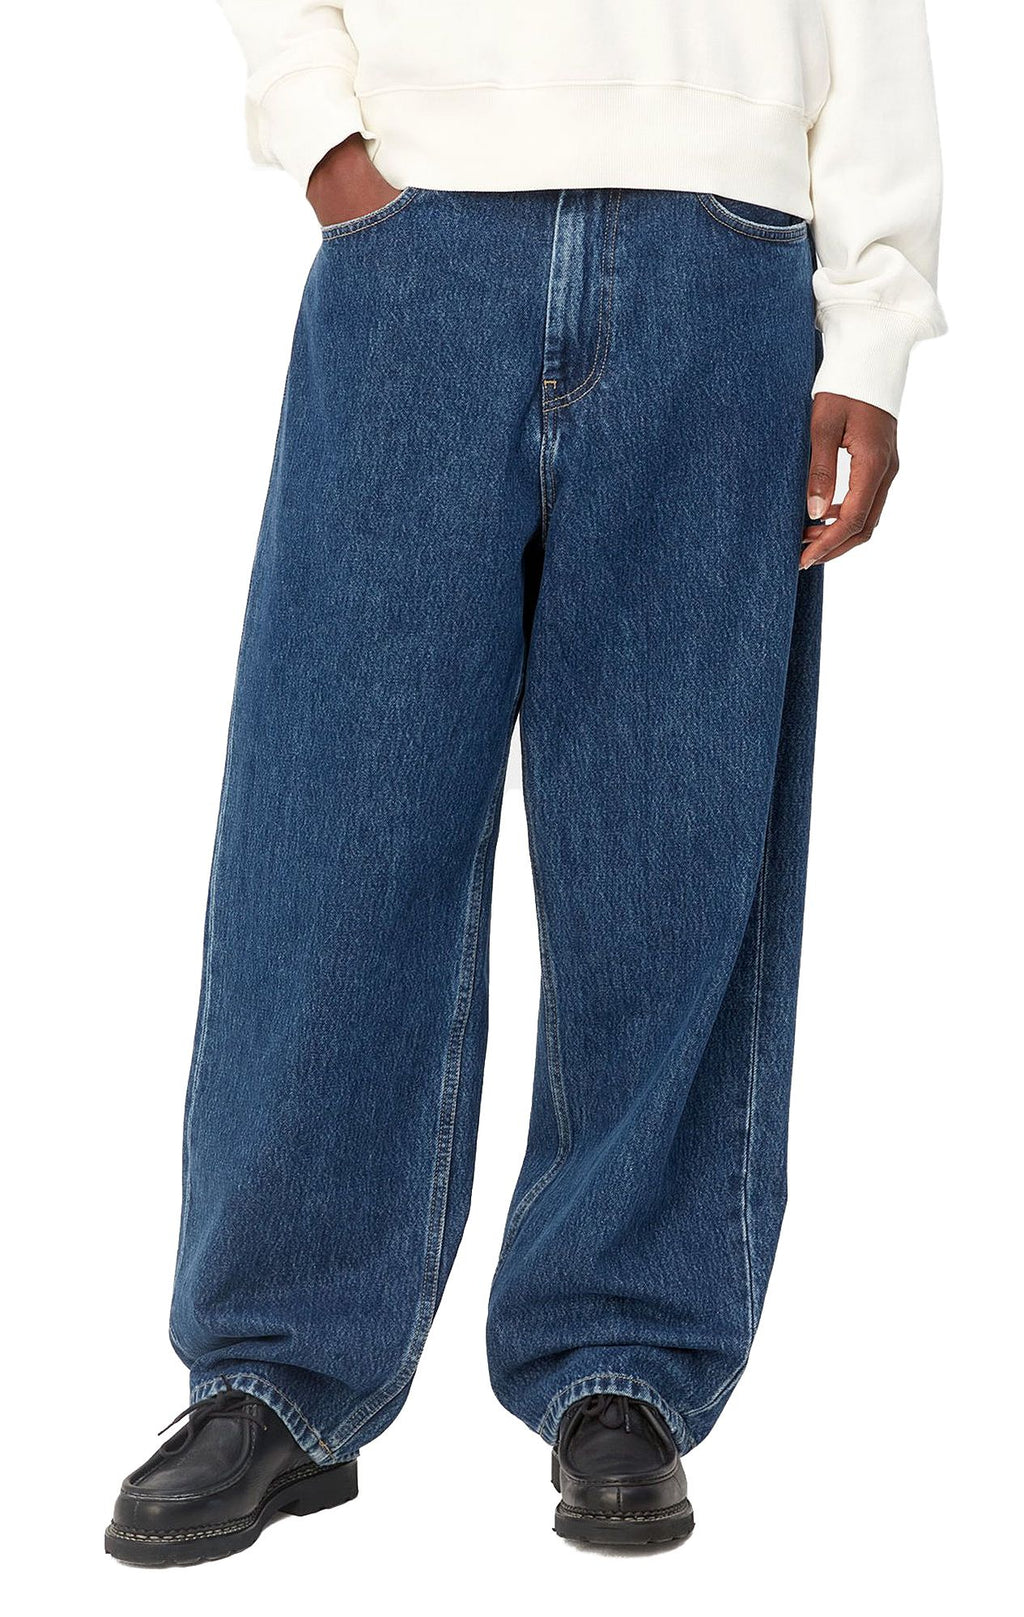  Carhartt Wip Jeans W Brandon Pant Blue Stone Washed Donna - 3